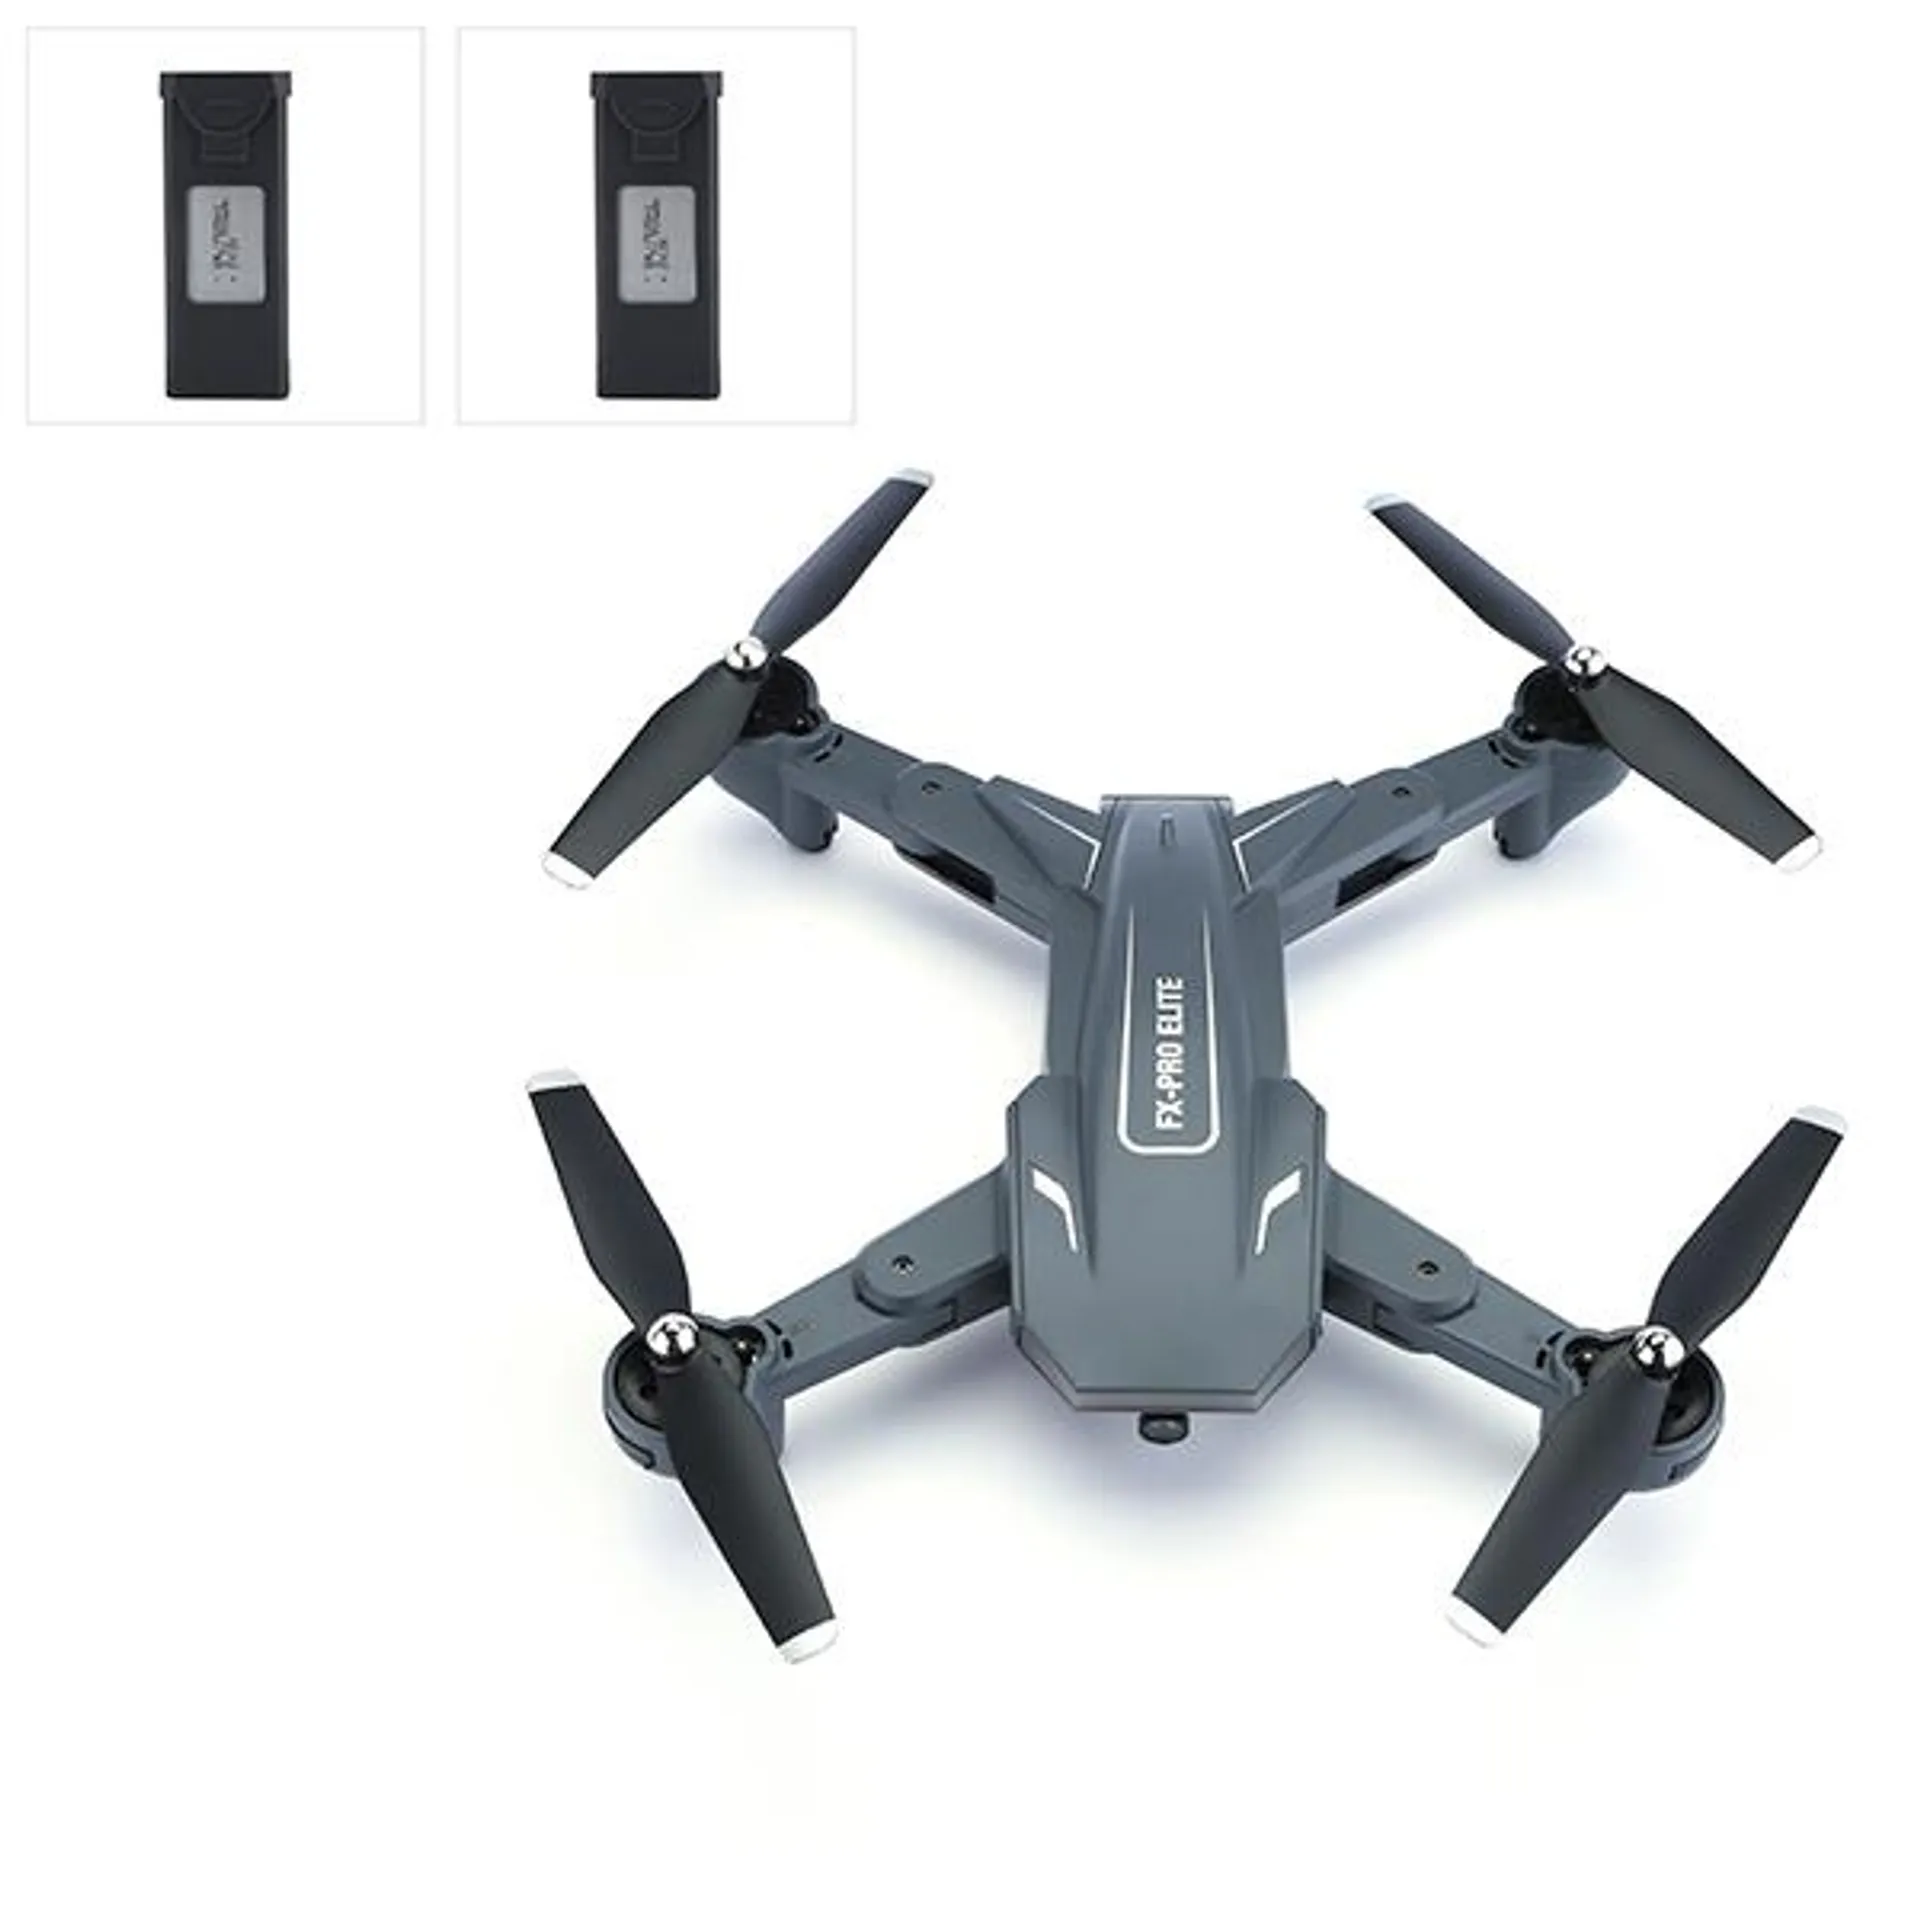 FX-PRO Elite Drone with 2 Extra Batteries and Storage Case